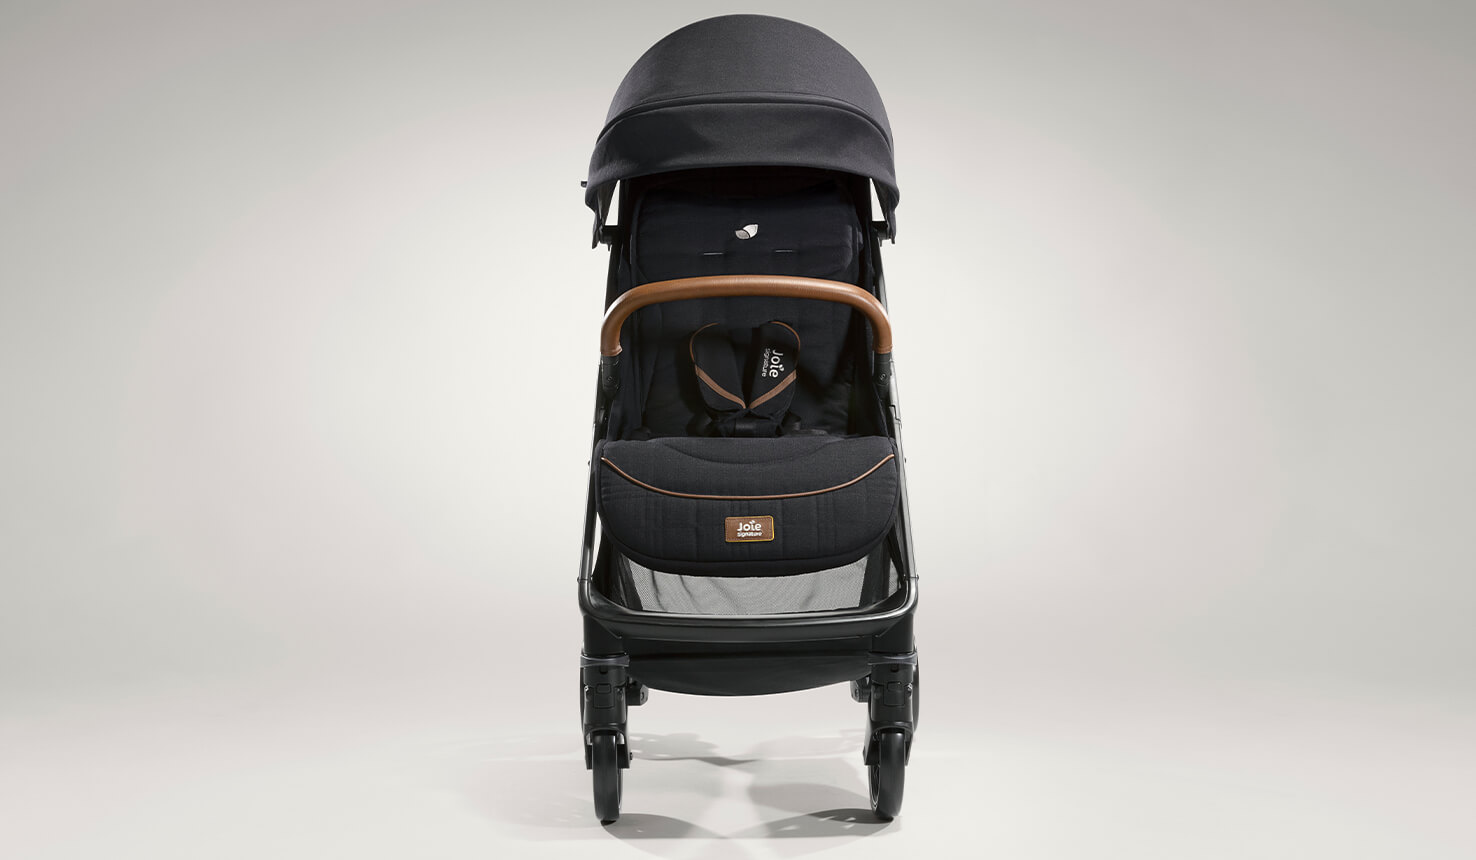  Joie signature lightweight stroller parcel in black facing straight ahead.